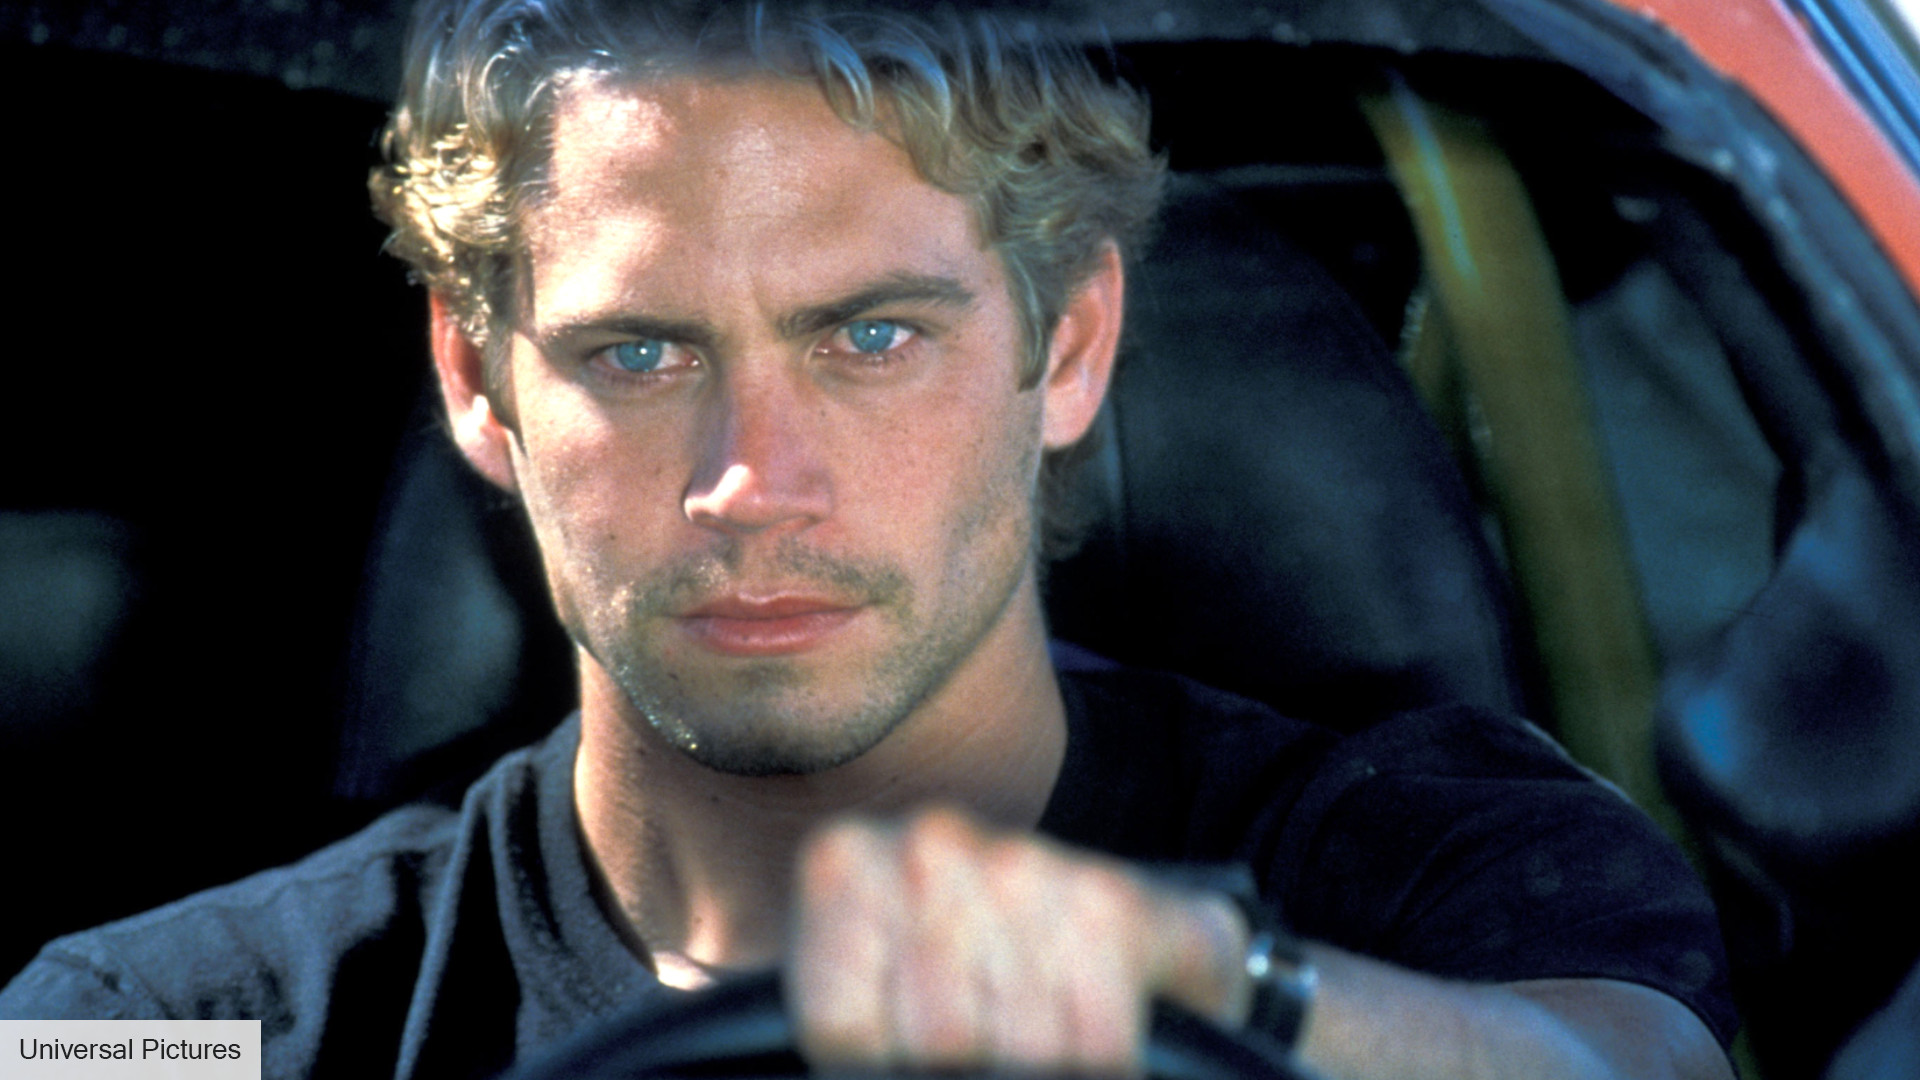 Zwart Buurt Uitwisseling Paul Walker of Fast and Furious movies to receive star on Walk of Fame |  The Digital Fix